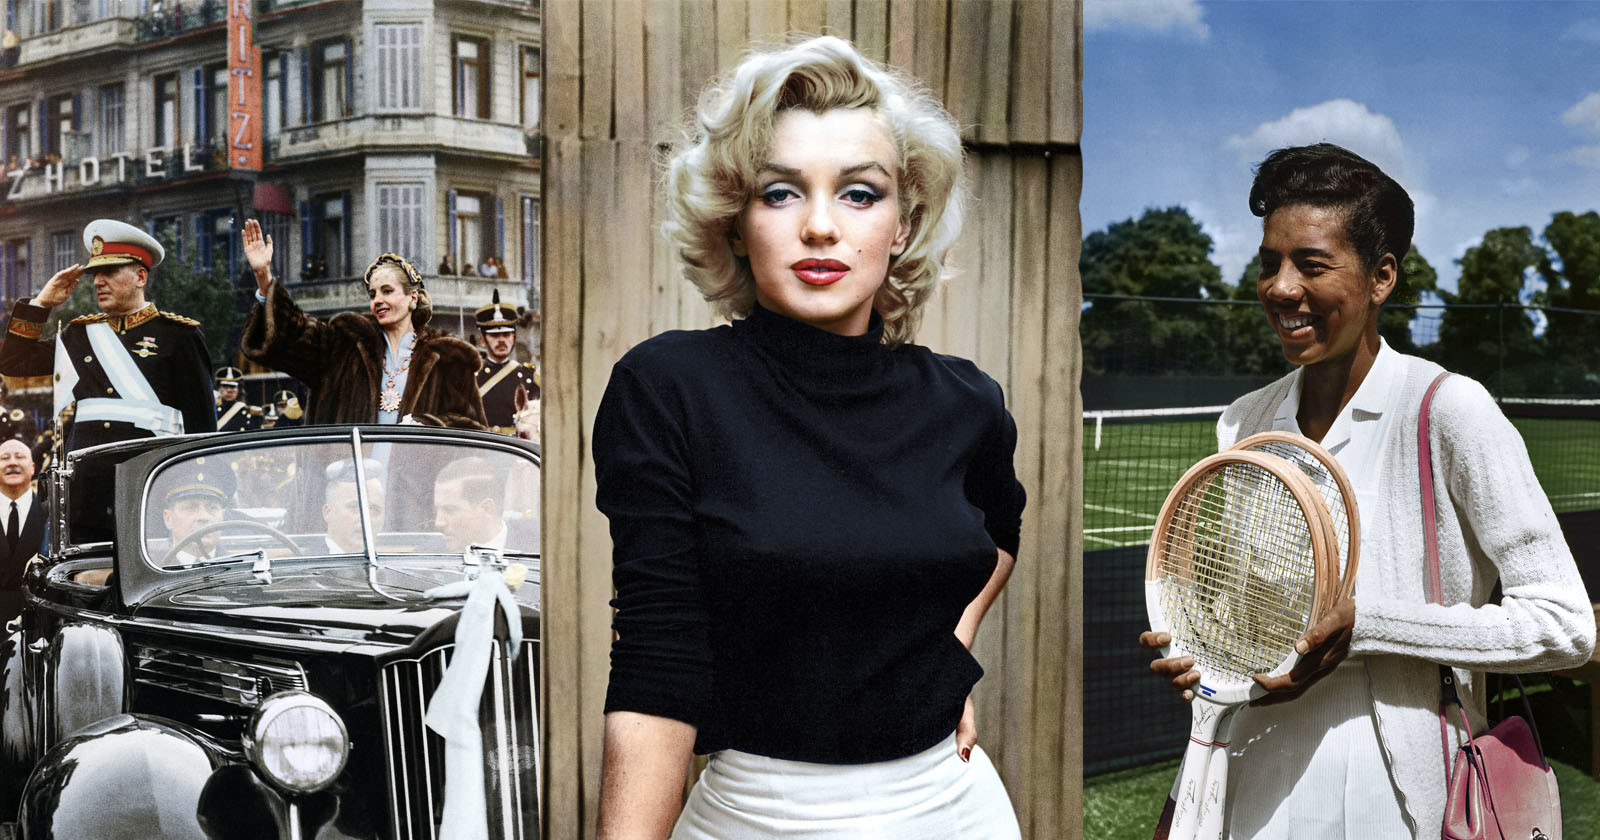 Colorized Photos Bring Influential Women Back to Life